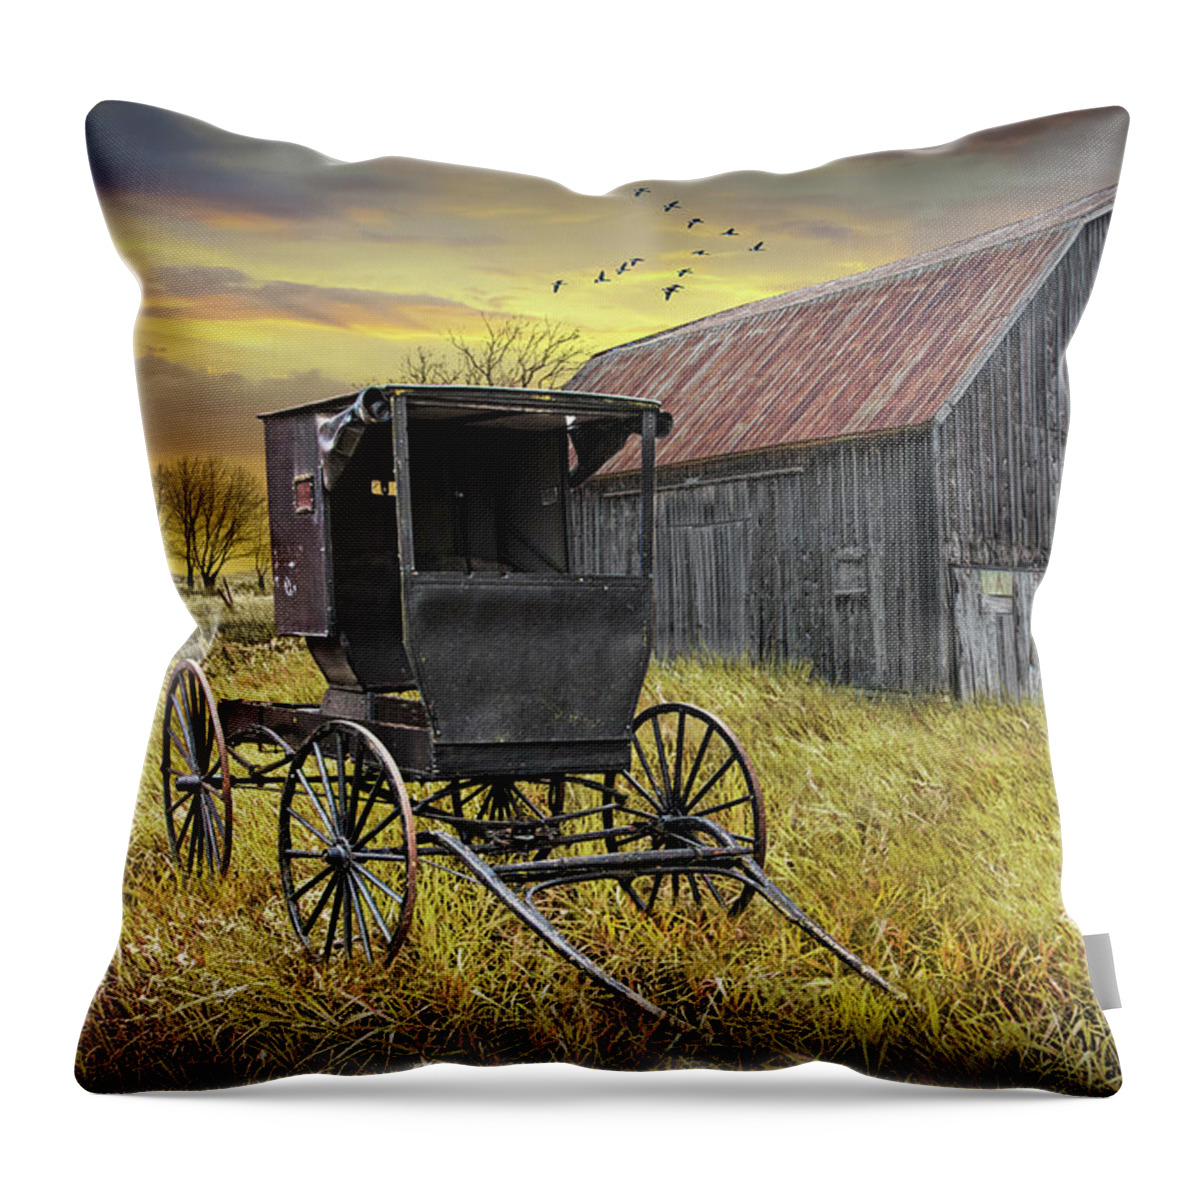 Barn Throw Pillow featuring the photograph Barn Quilt with Amish Buggy and Horse on Amish Farm at Sunset by Randall Nyhof